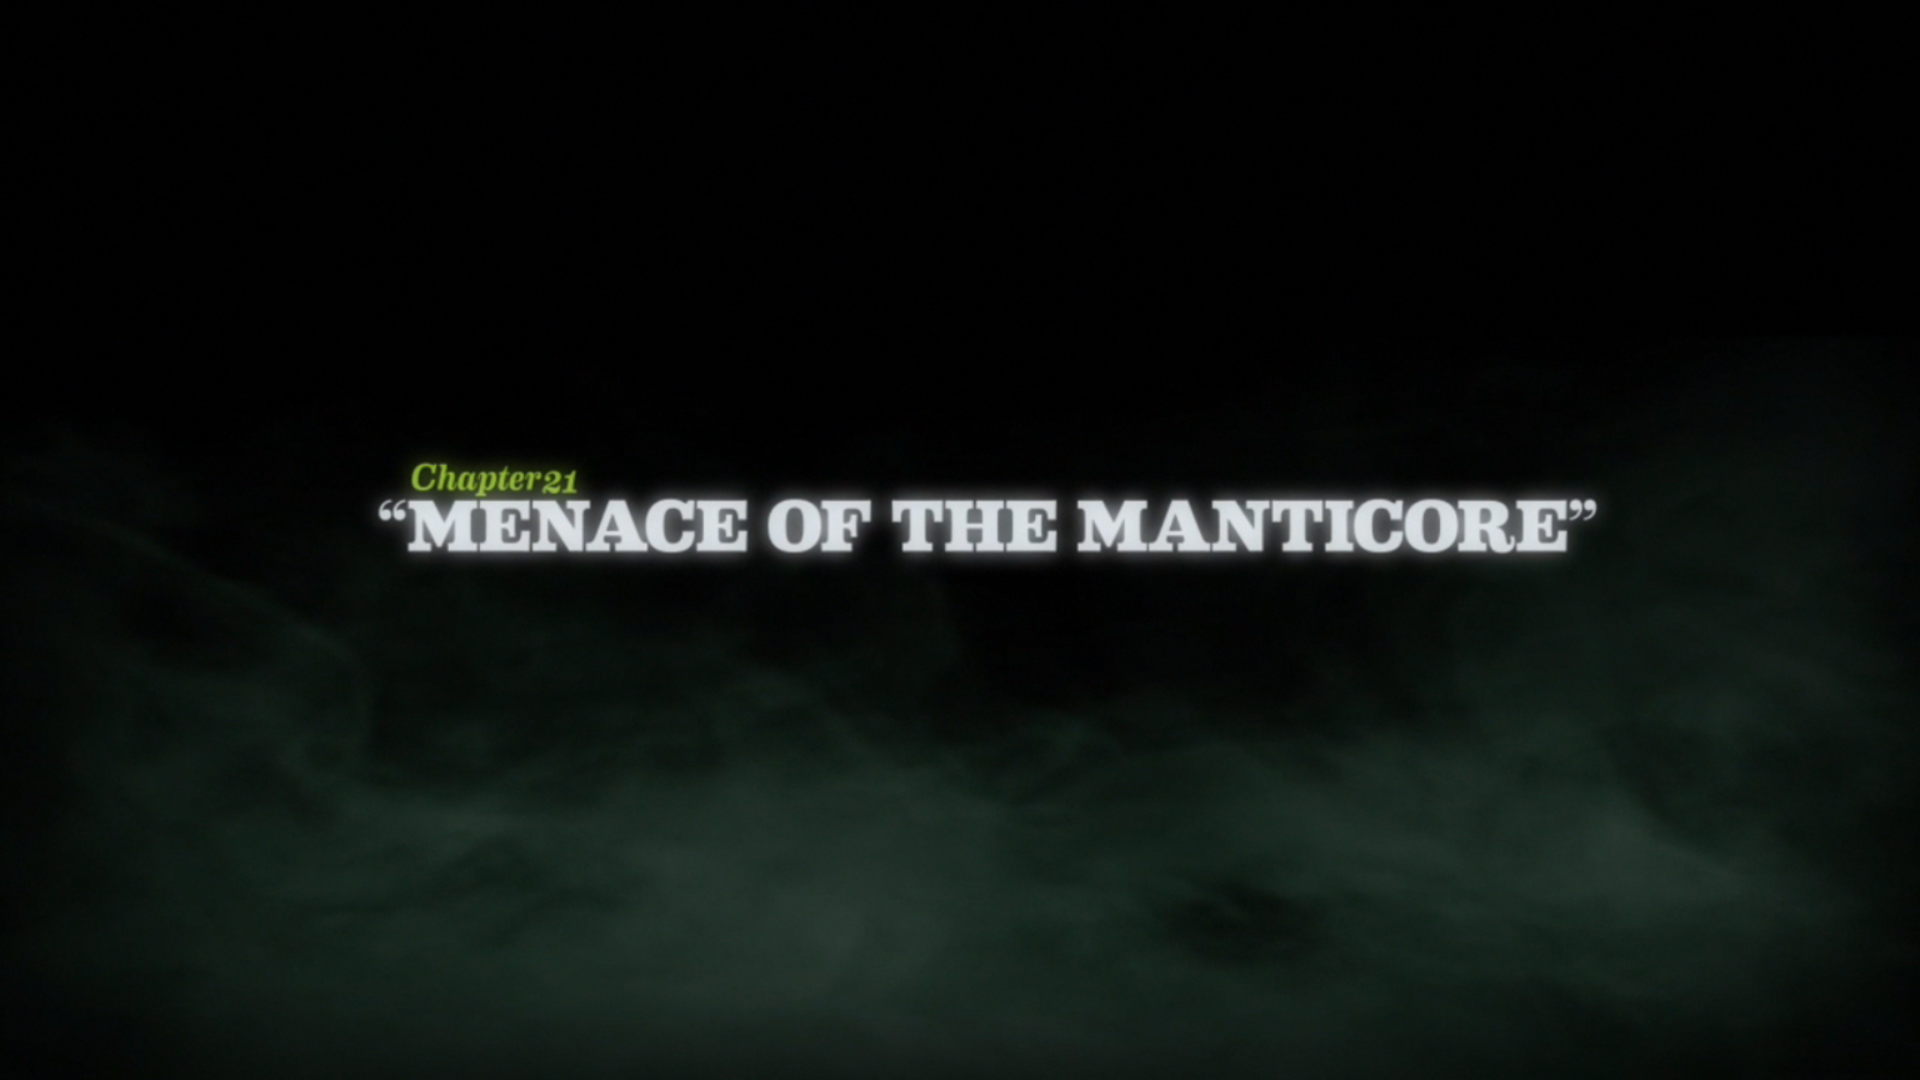 Menace_of_the_Manticore_title_card